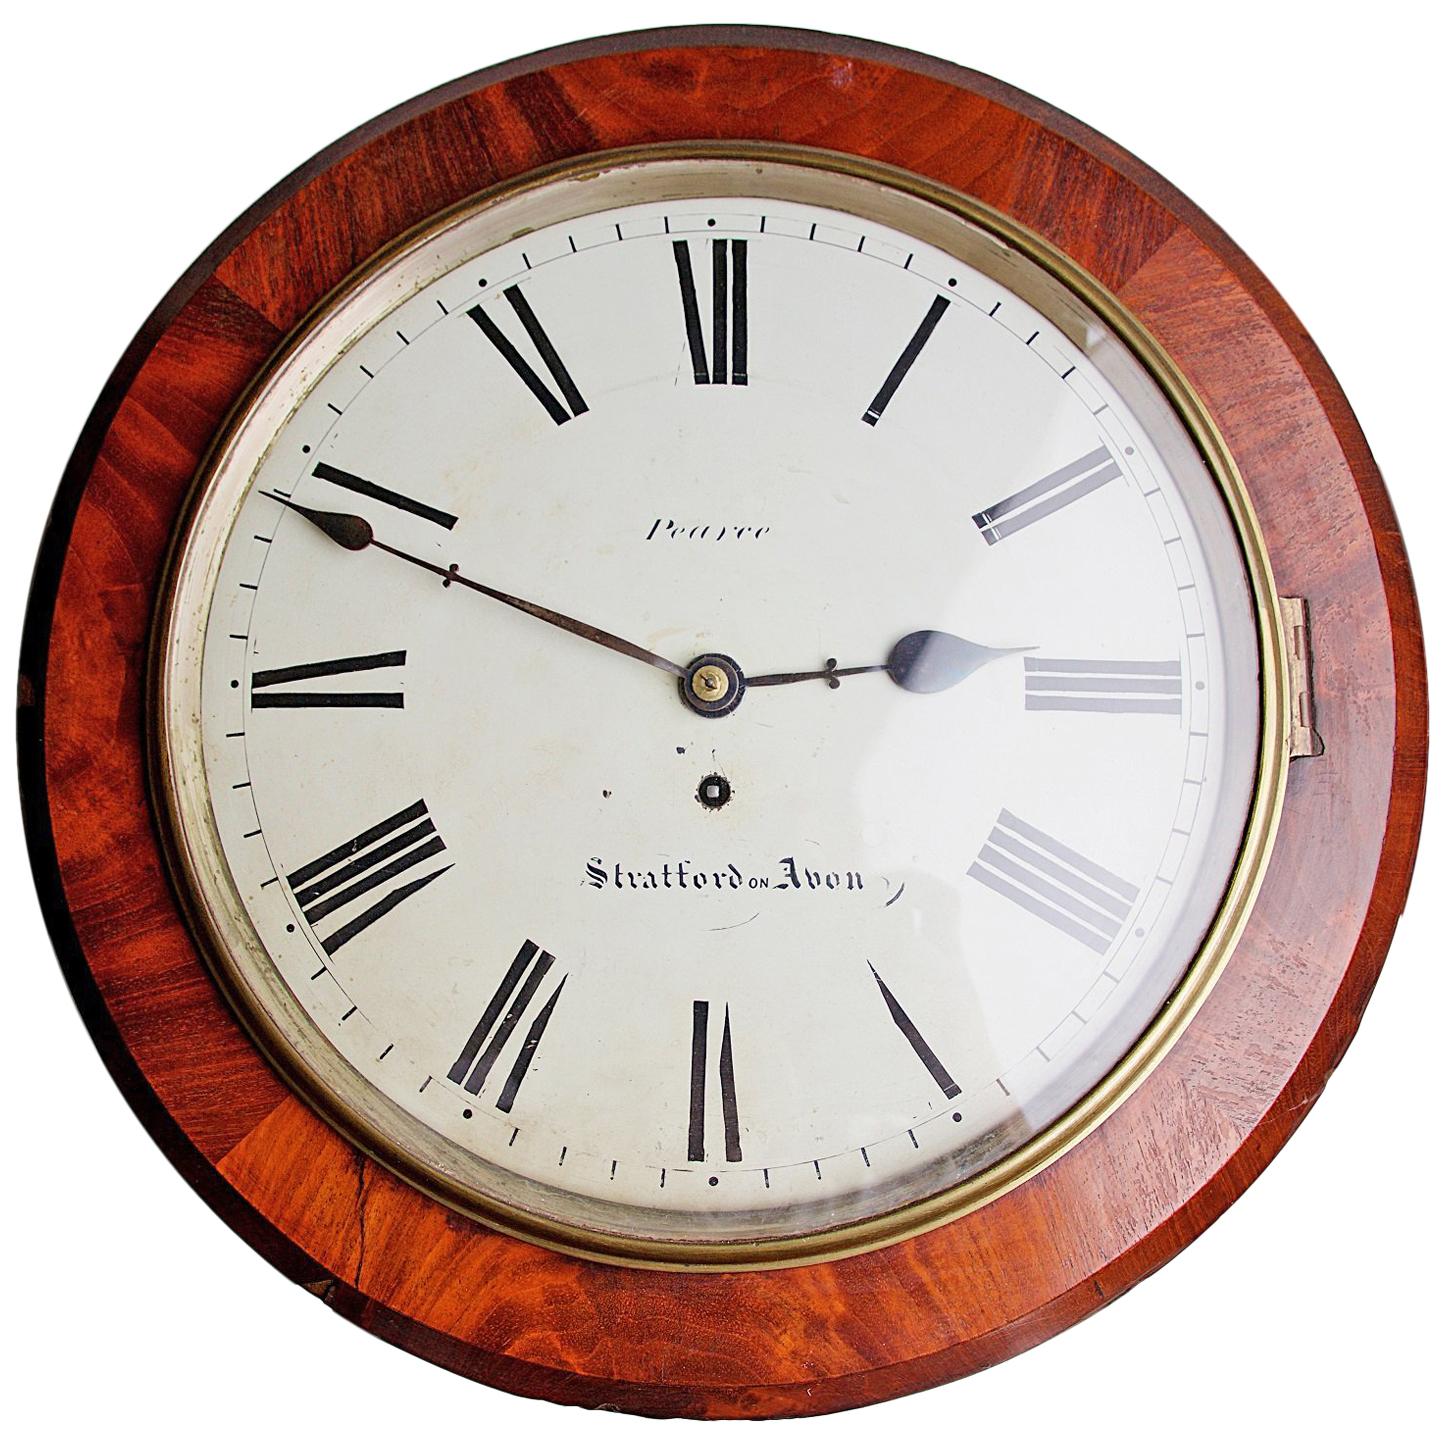 Early 19th Century Pearson of Stratford Upon Avon Clock